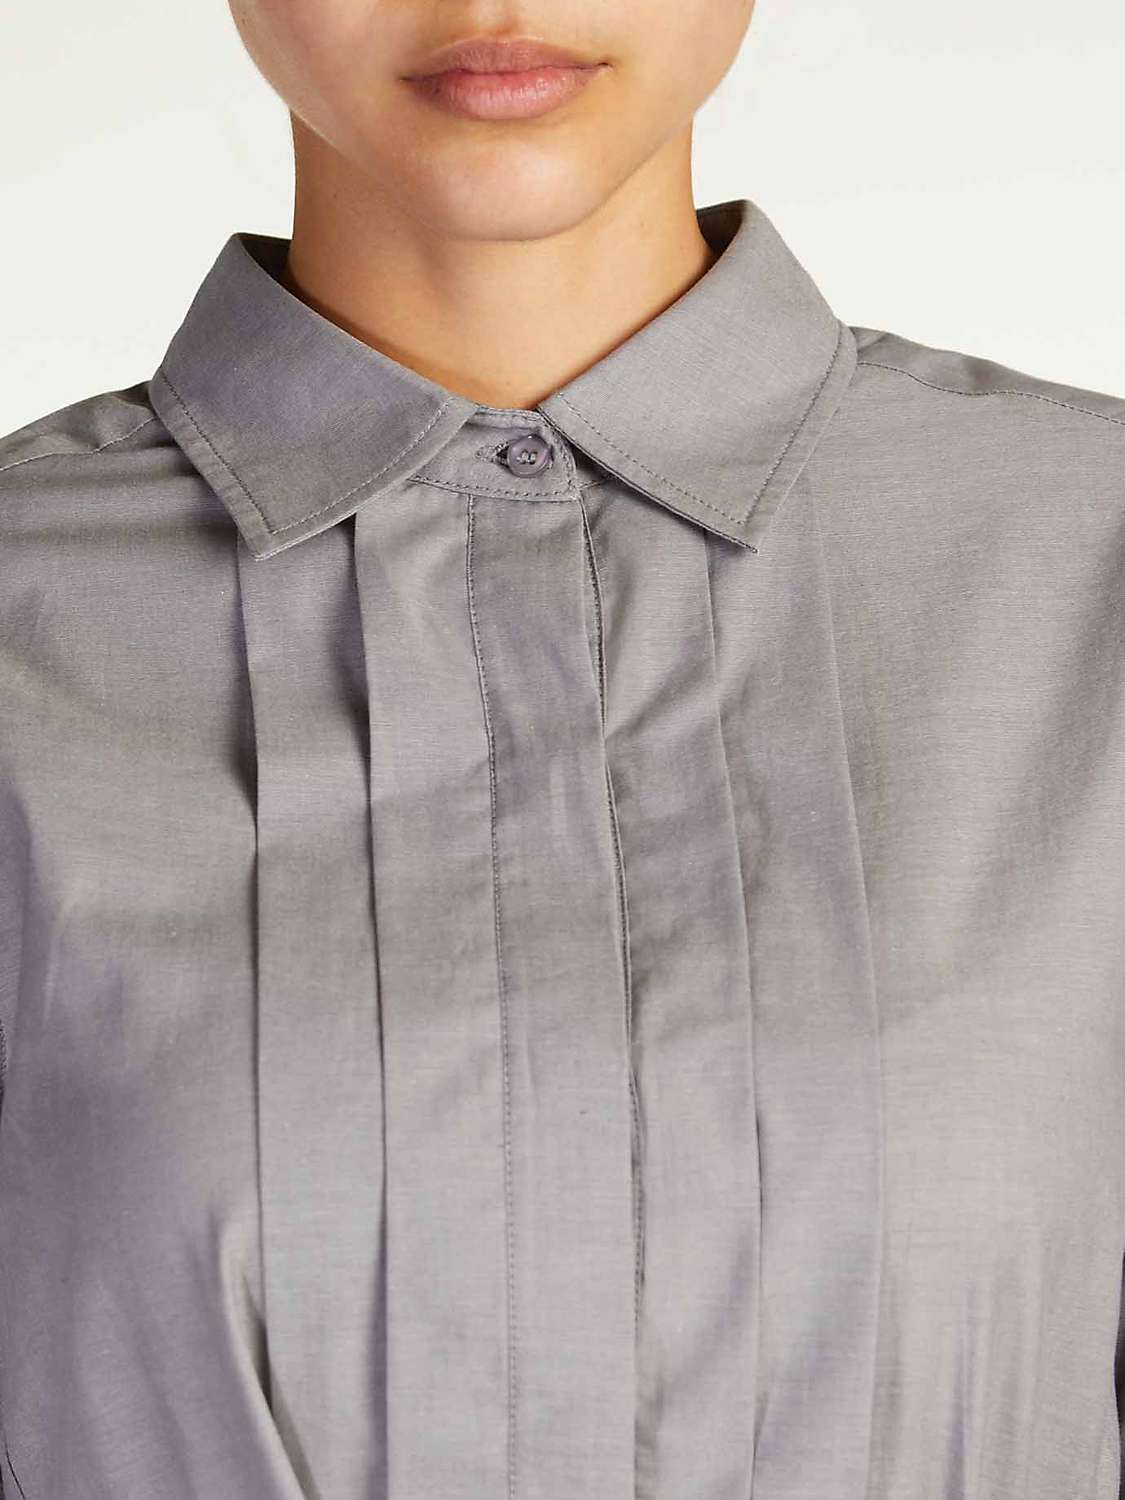 Buy Aab Pleat Neck Chambray Cotton Maxi Dress, Grey Online at johnlewis.com